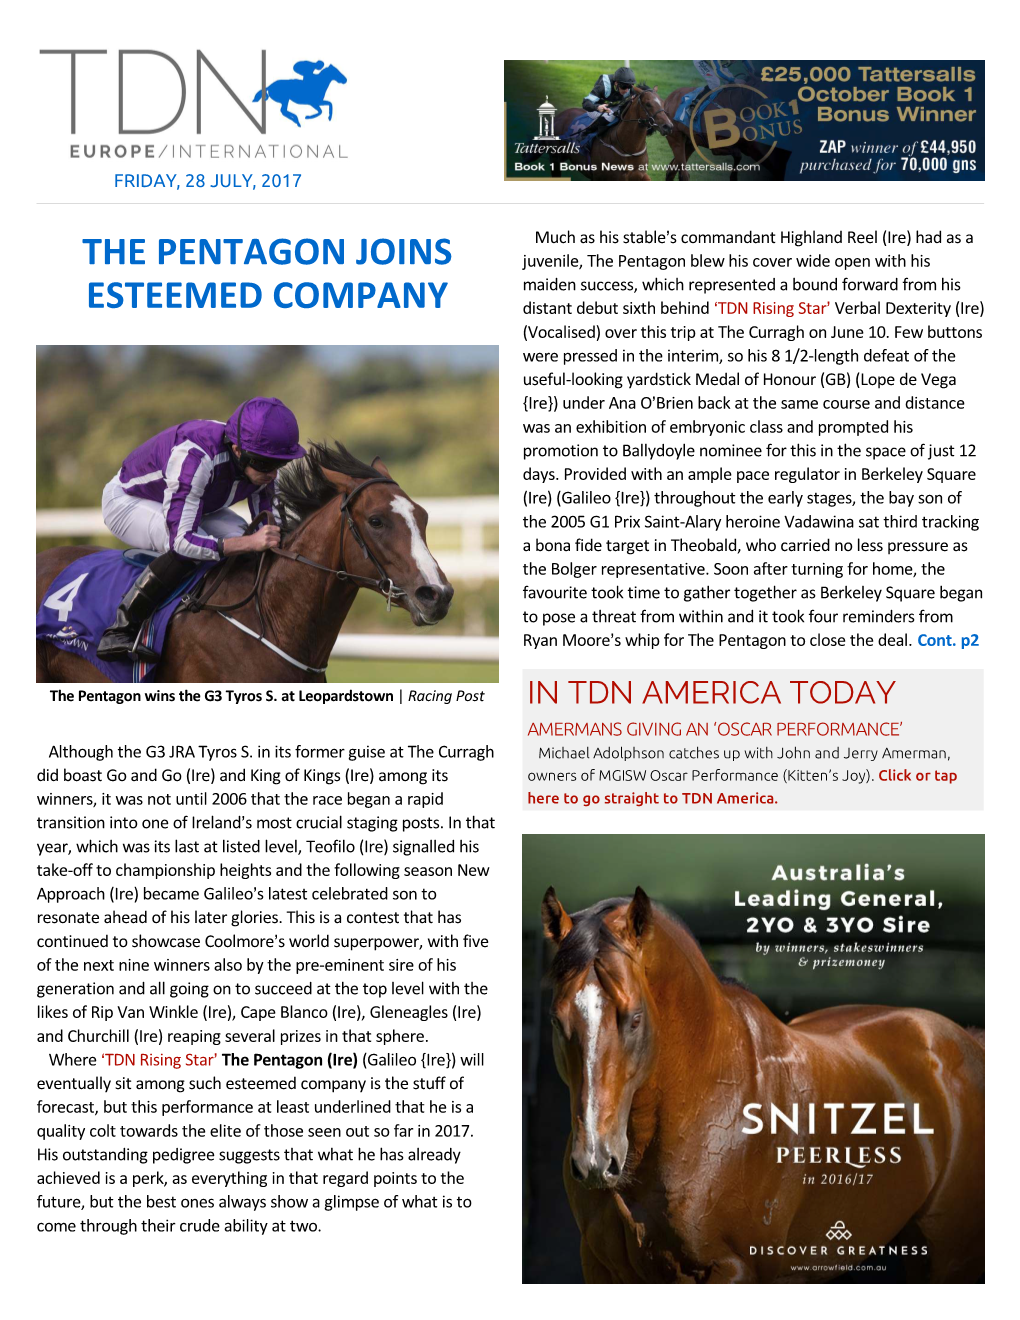 In Tdn Europe Today